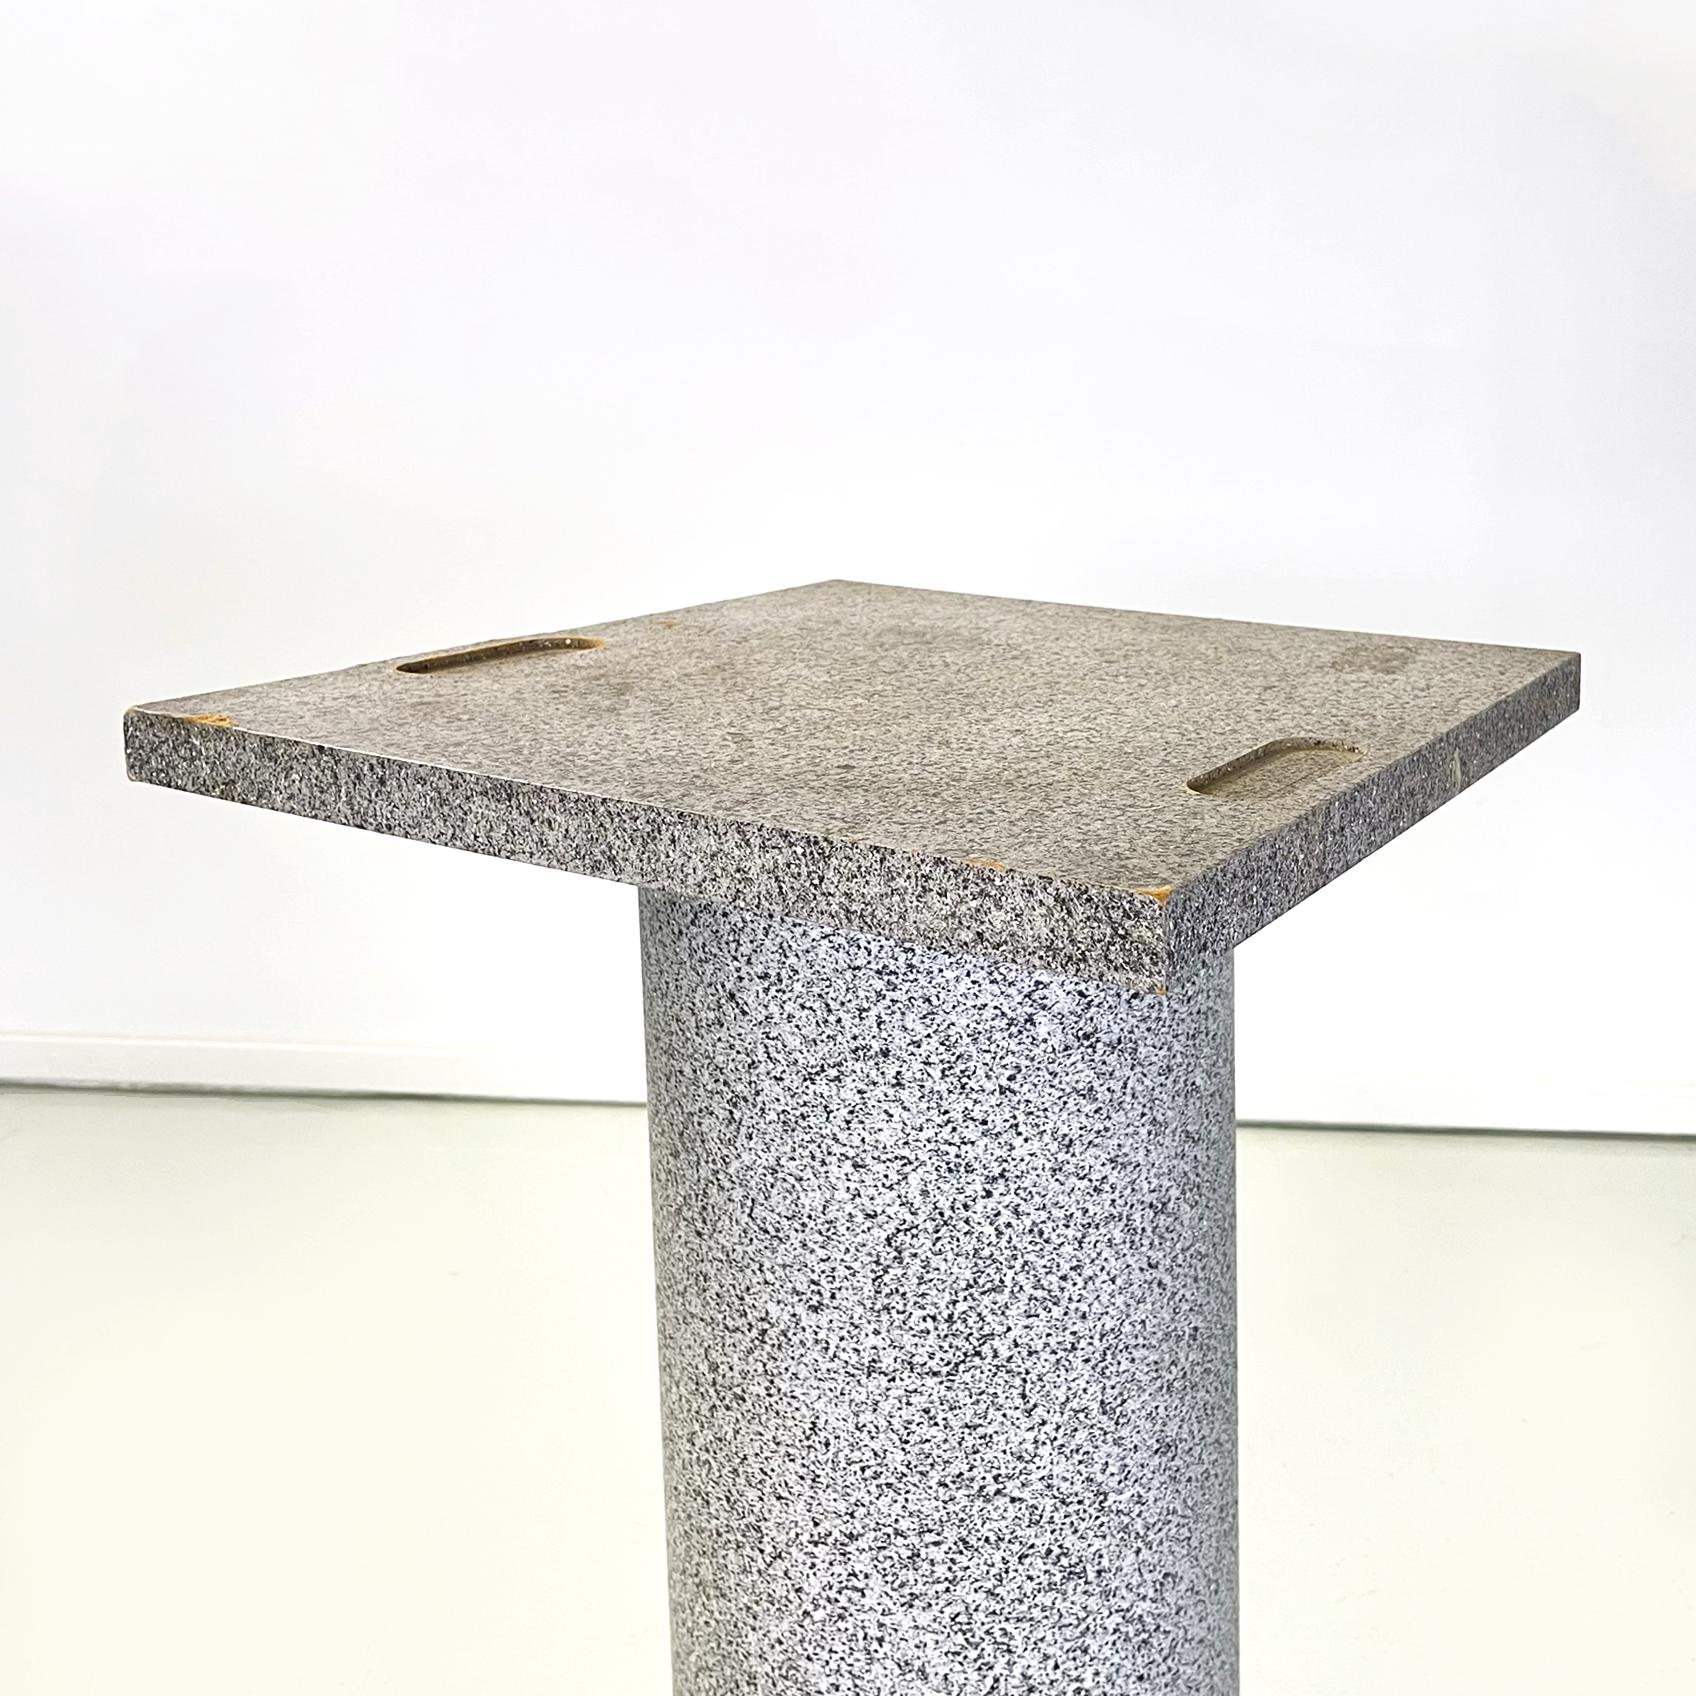 Post-Modern Italian Modern Pedestal Column in Wood Painted as Stone, 1990s-2000s For Sale